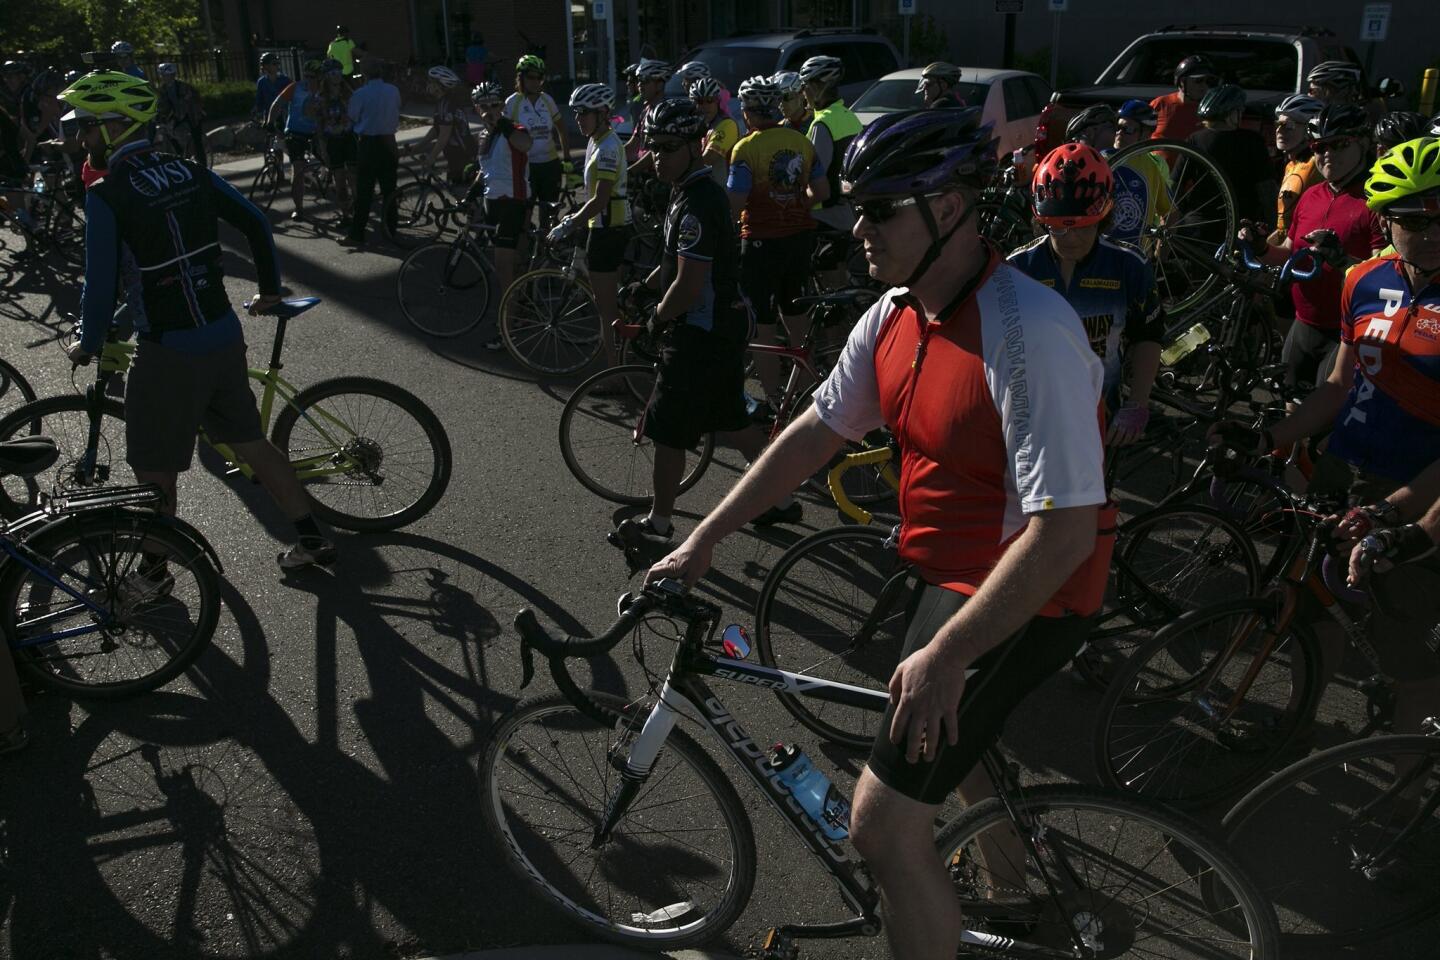 People prepare for a silent bike ride in Kalamazoo, Mich., on June 8, 2016, supporting the cyclists who were killed and injured in a crash the day before.